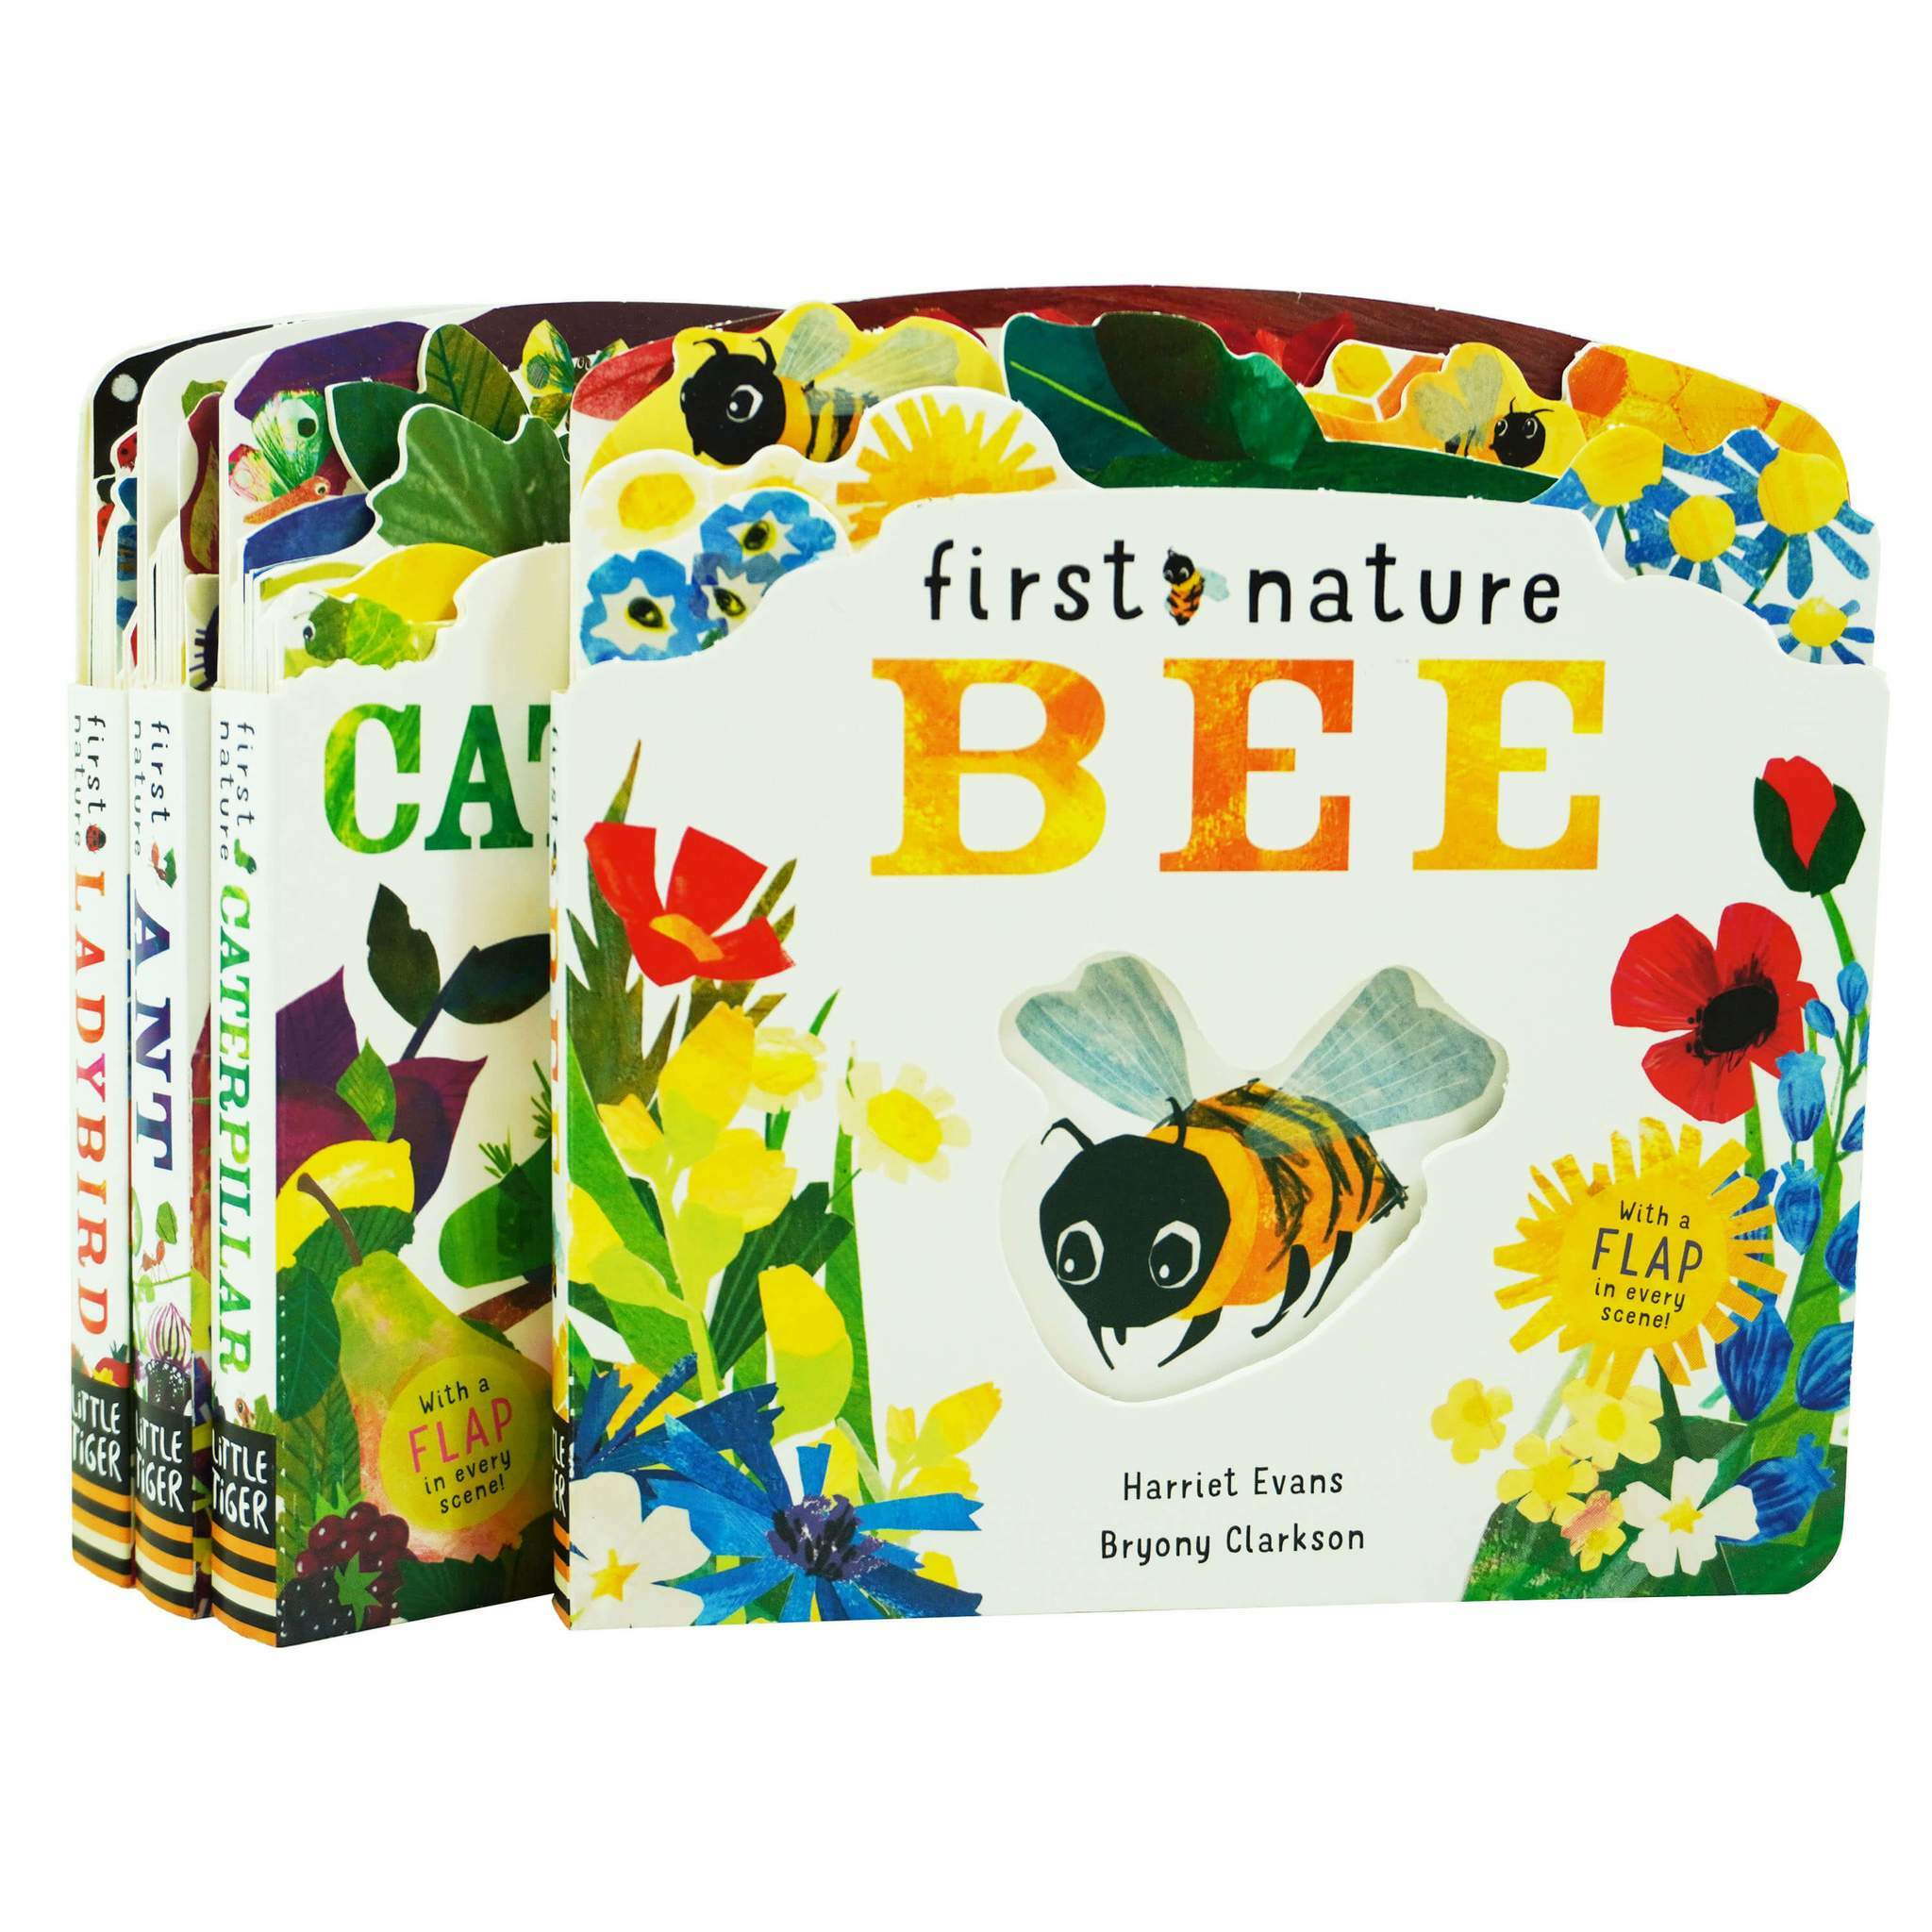 First Nature 4 Books Childrens Collection Set (Board Book 4권)